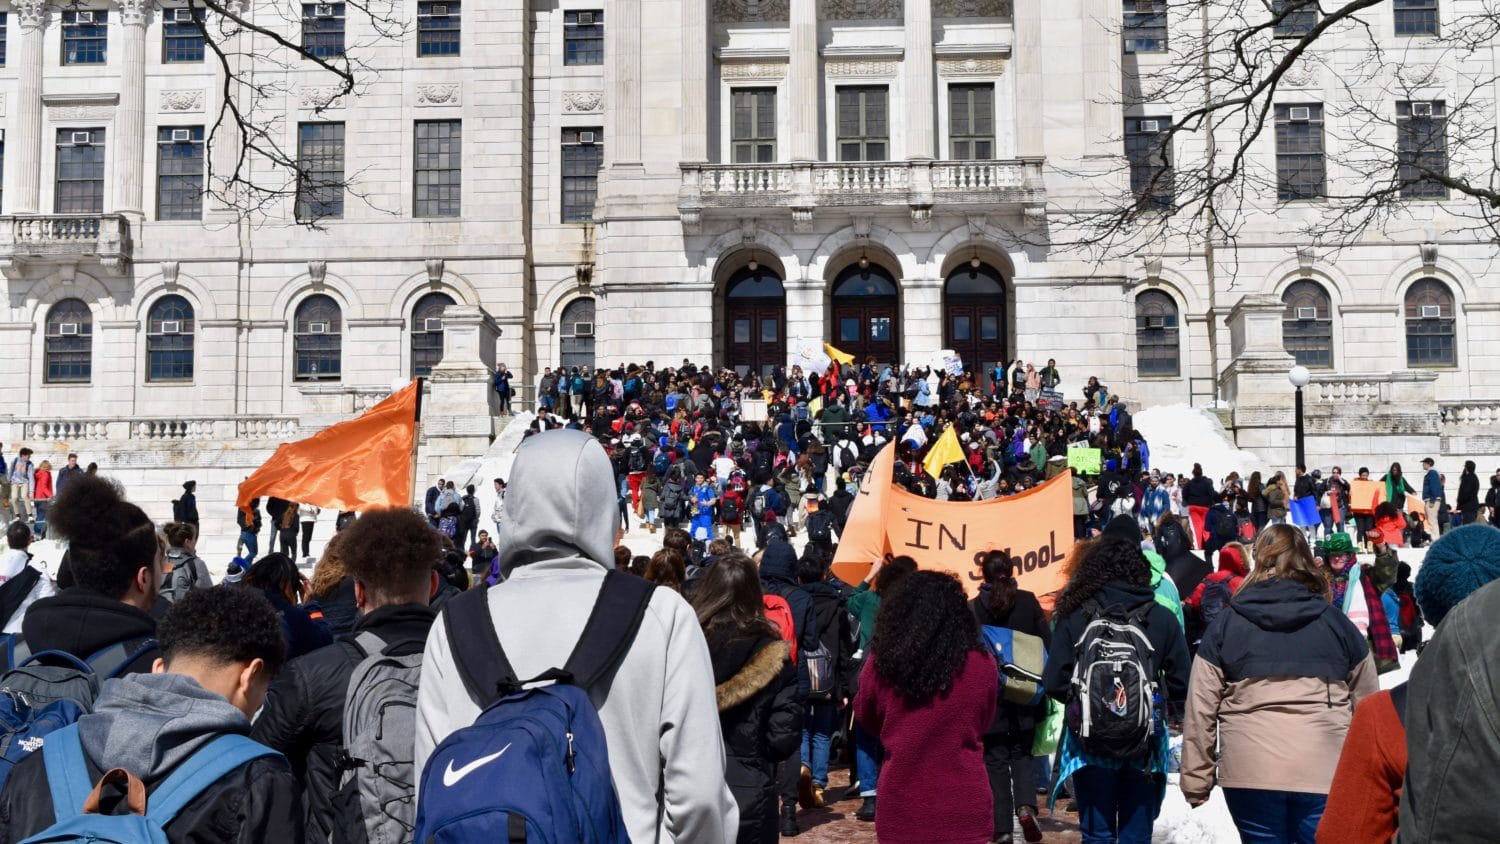 Rhode Island News: Students speak out at the Providence Walkout to End Gun Violence